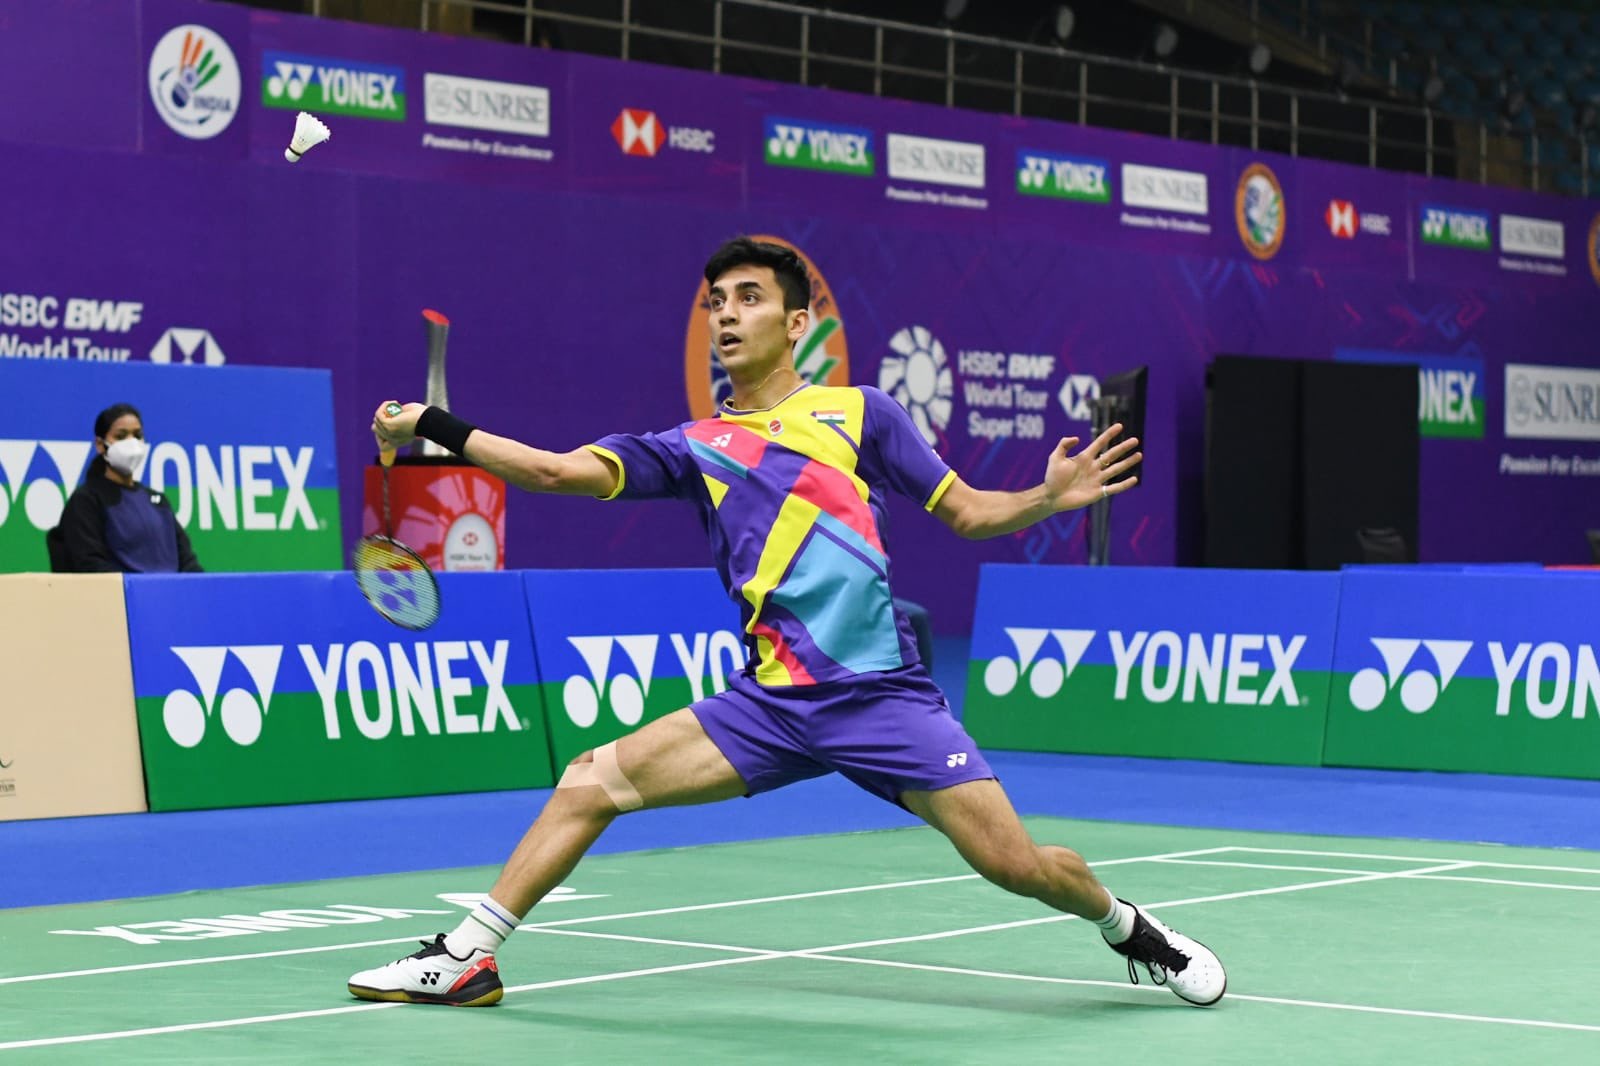 All England Open: Big injury scare for Lakshya Sen, doubtful for All England Open- Follow LIVE updates